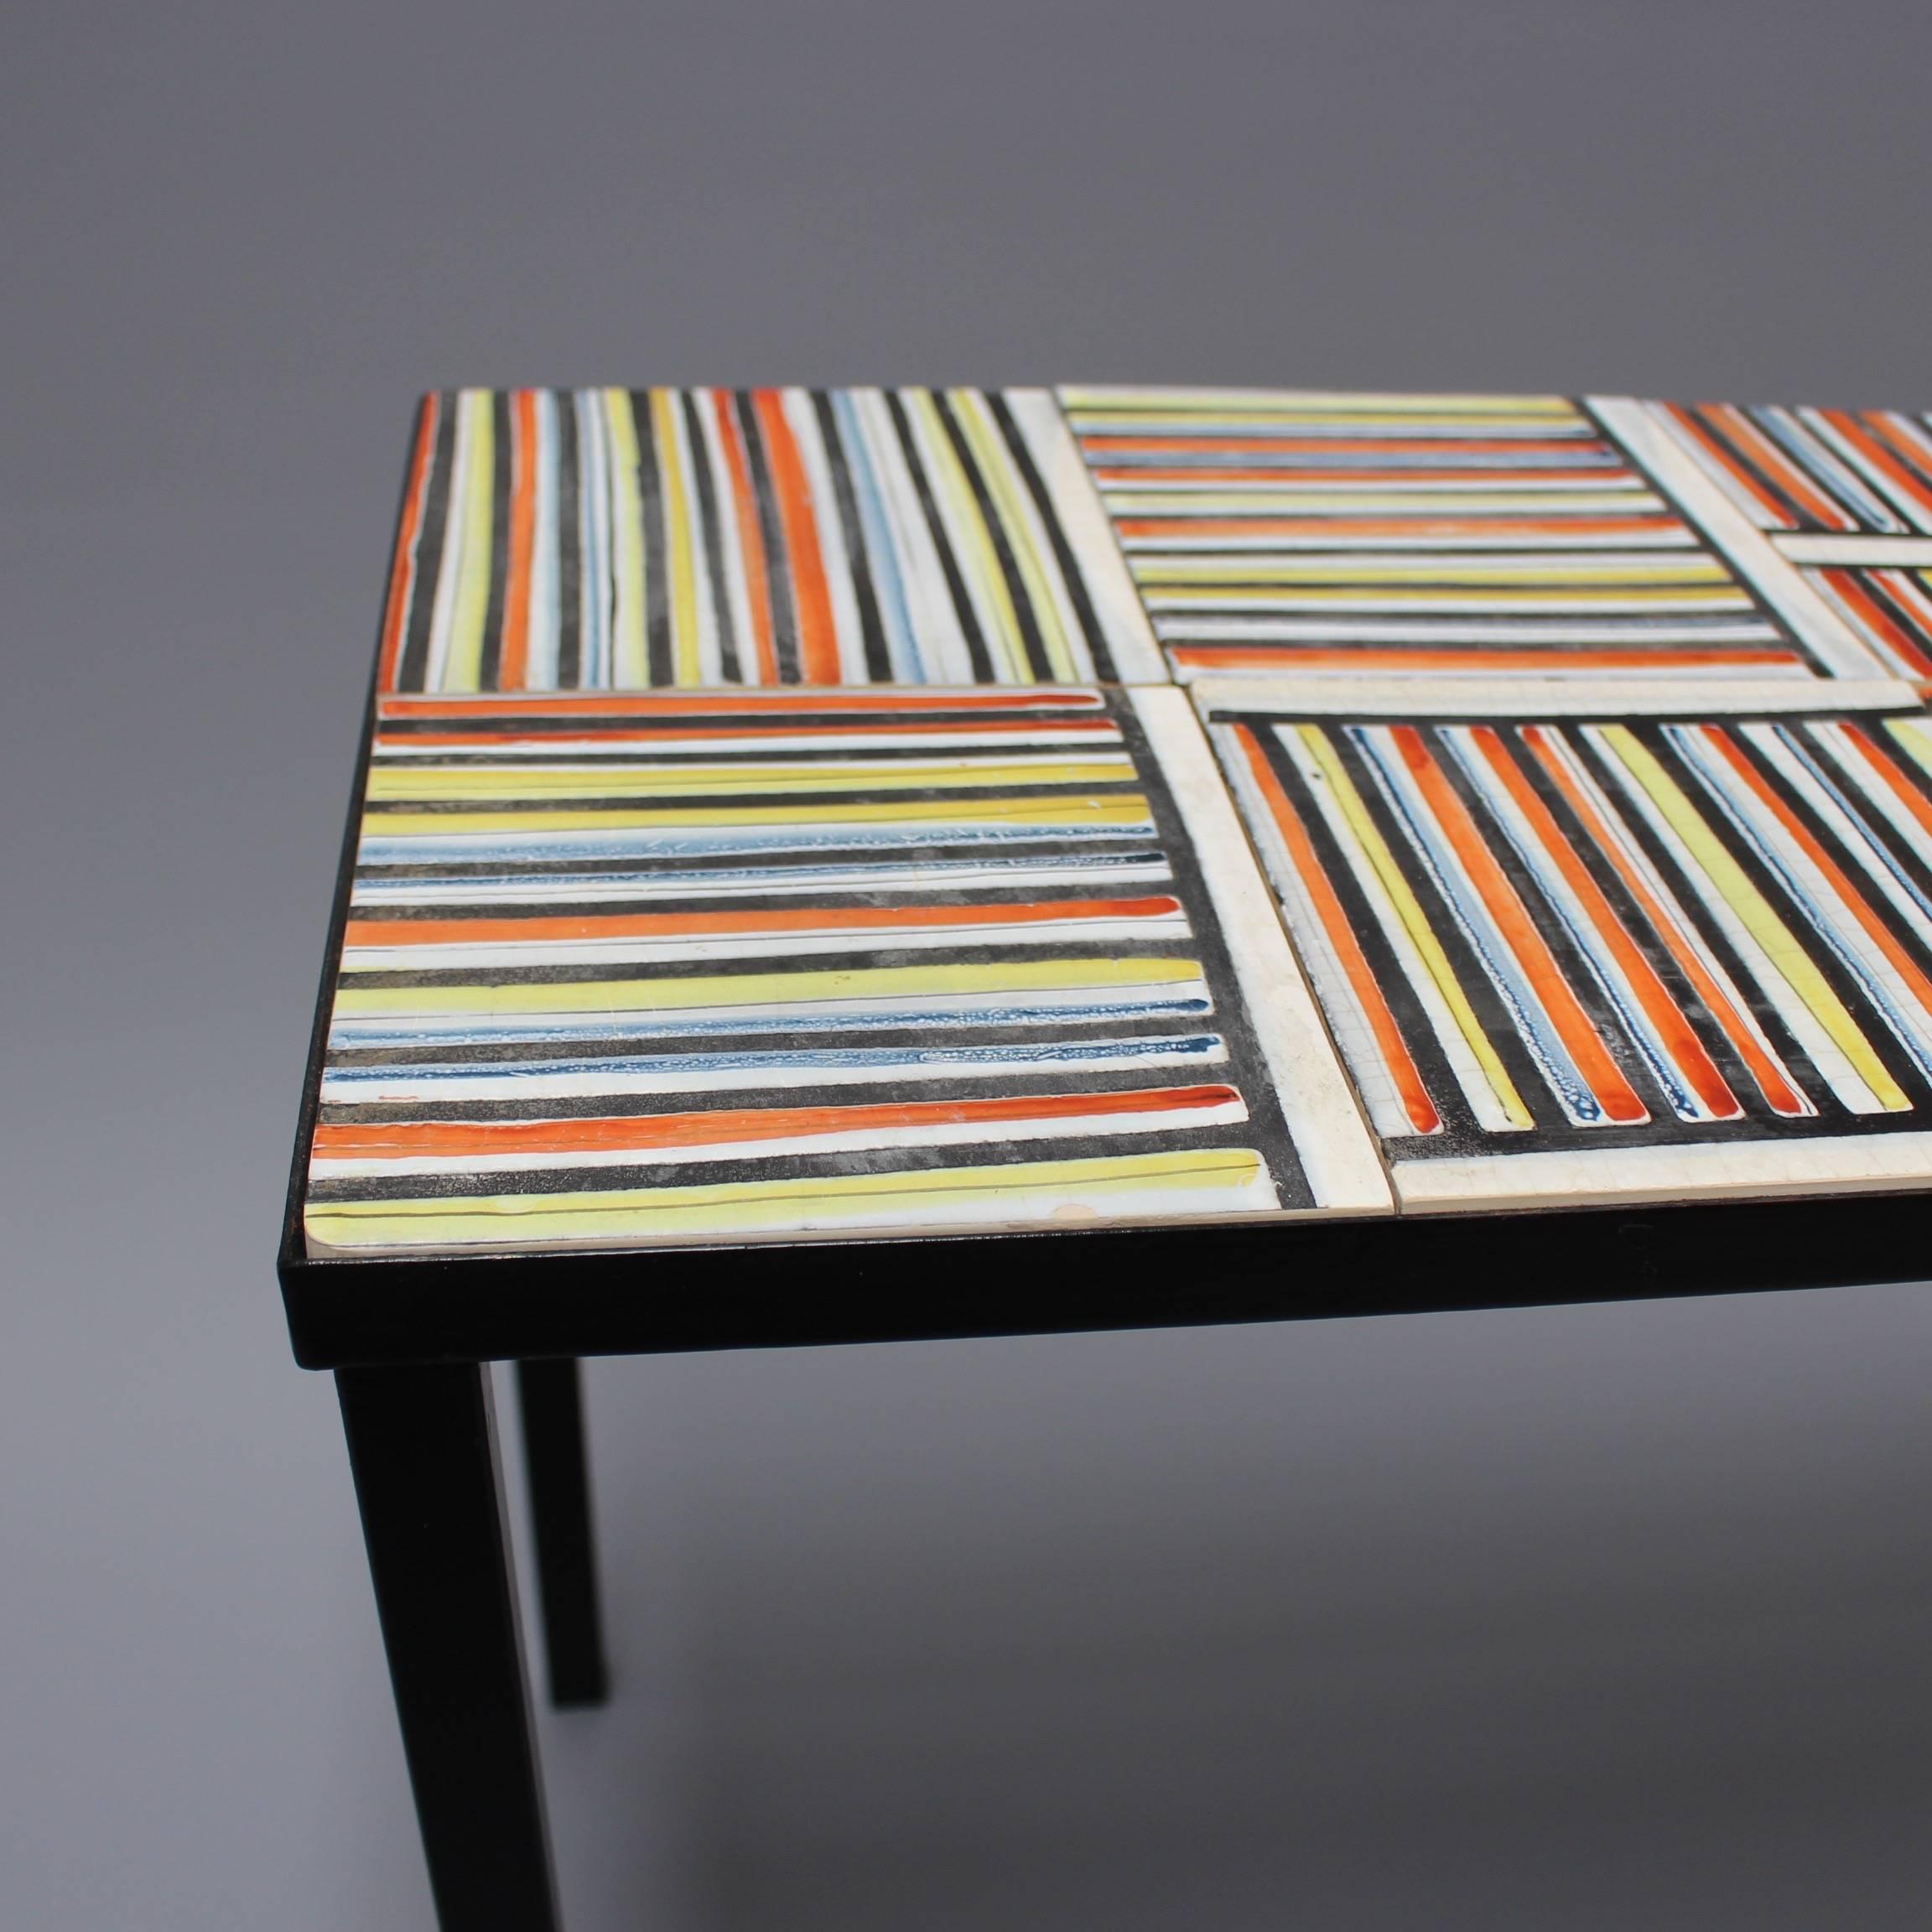 Coffee table with colourful ceramic tiles by artist Roger Capron (1922-2006), who founded the craft-based workshop in Vallauris, France, l'Atelier Callis, where his creations contributed to a veritable renaissance of pottery and ceramics. Capron